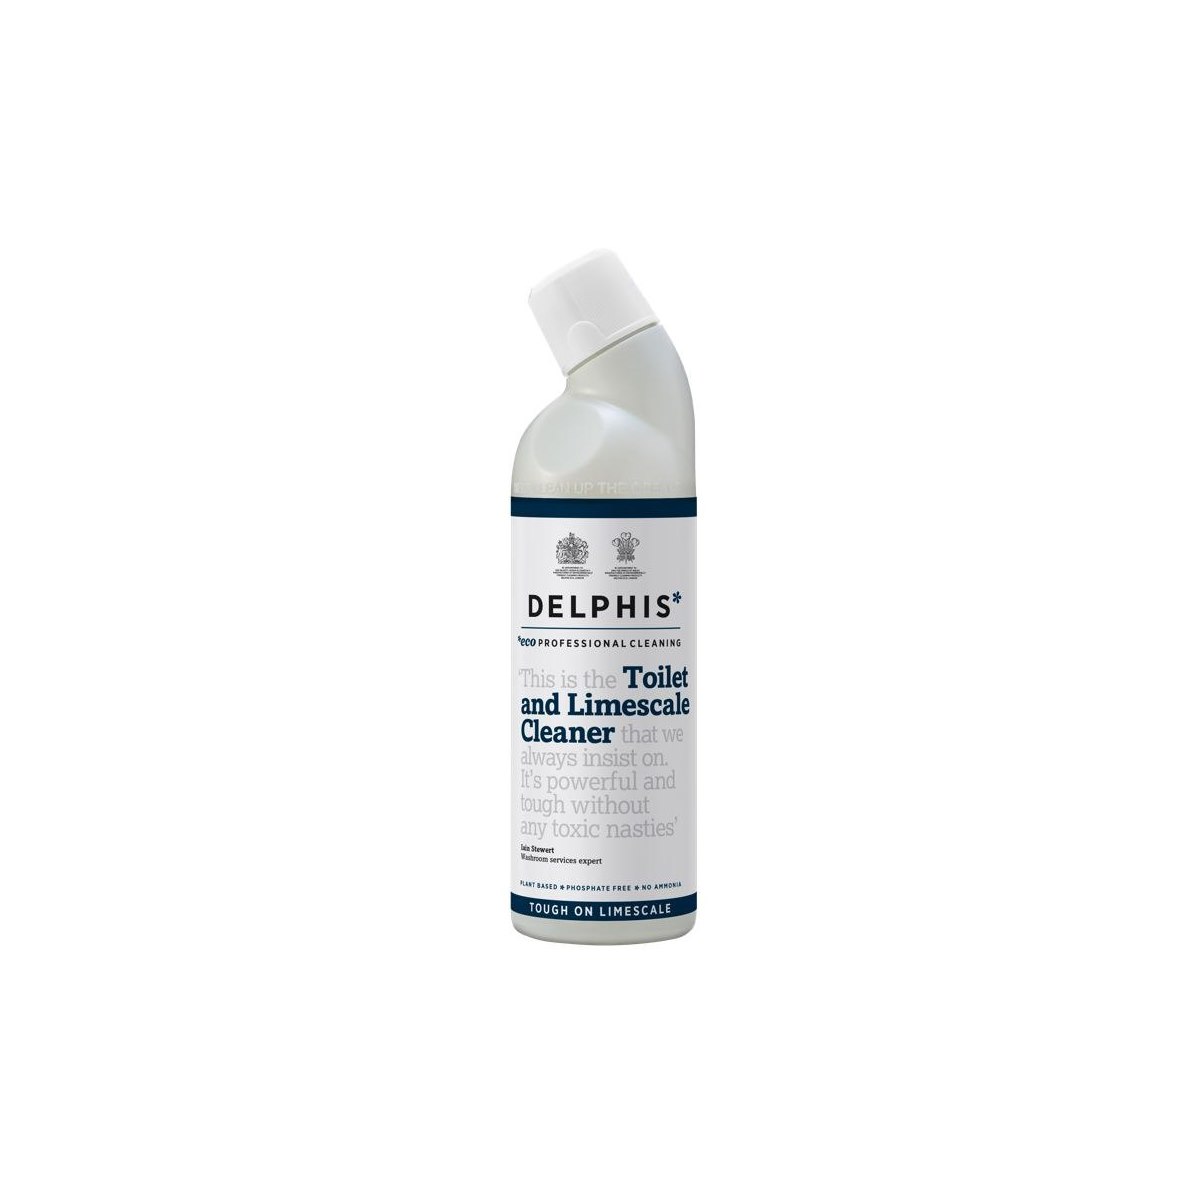 Delphis Eco Professional Cleaning Toilet and Limescale Cleaner 750ml